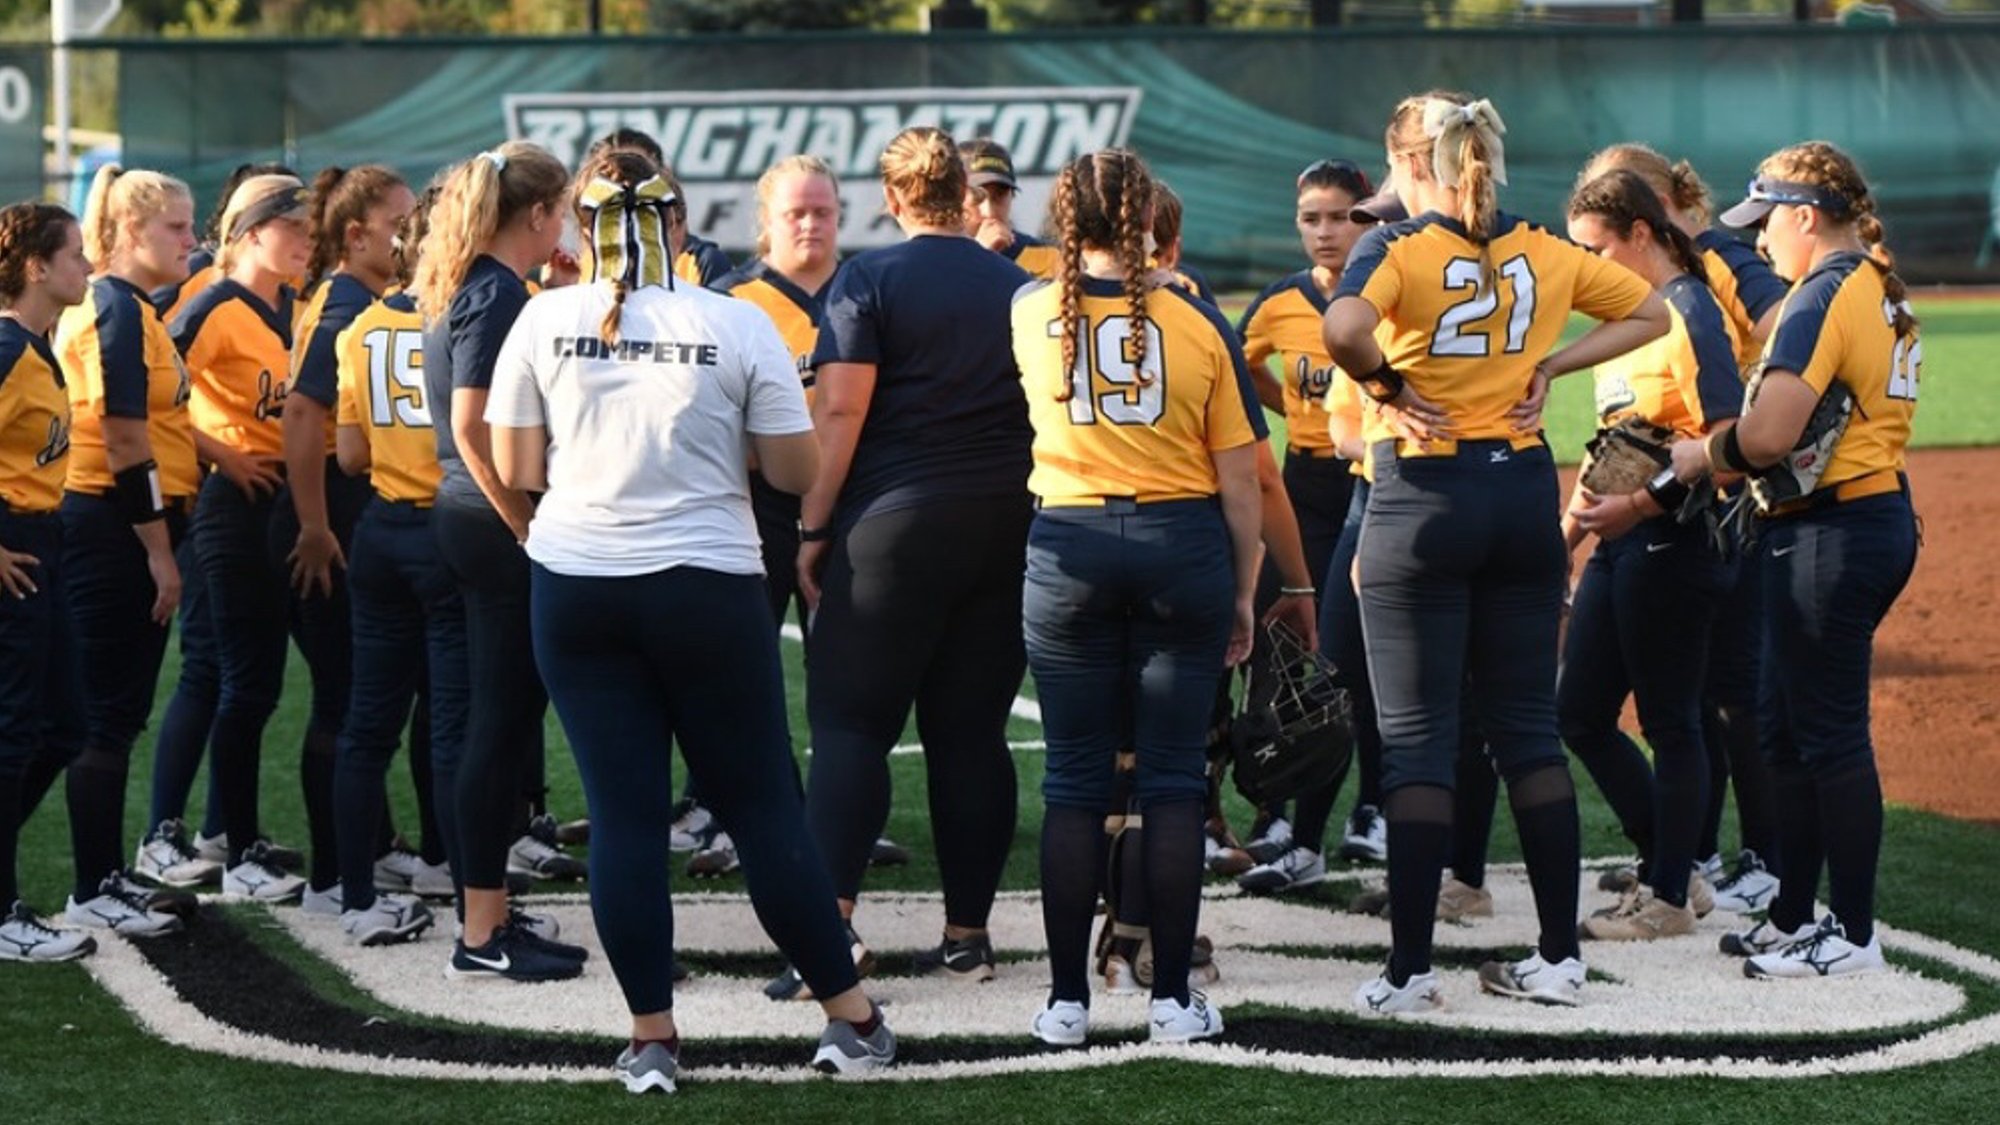 French hires Wheat as Assistant Softball Coach